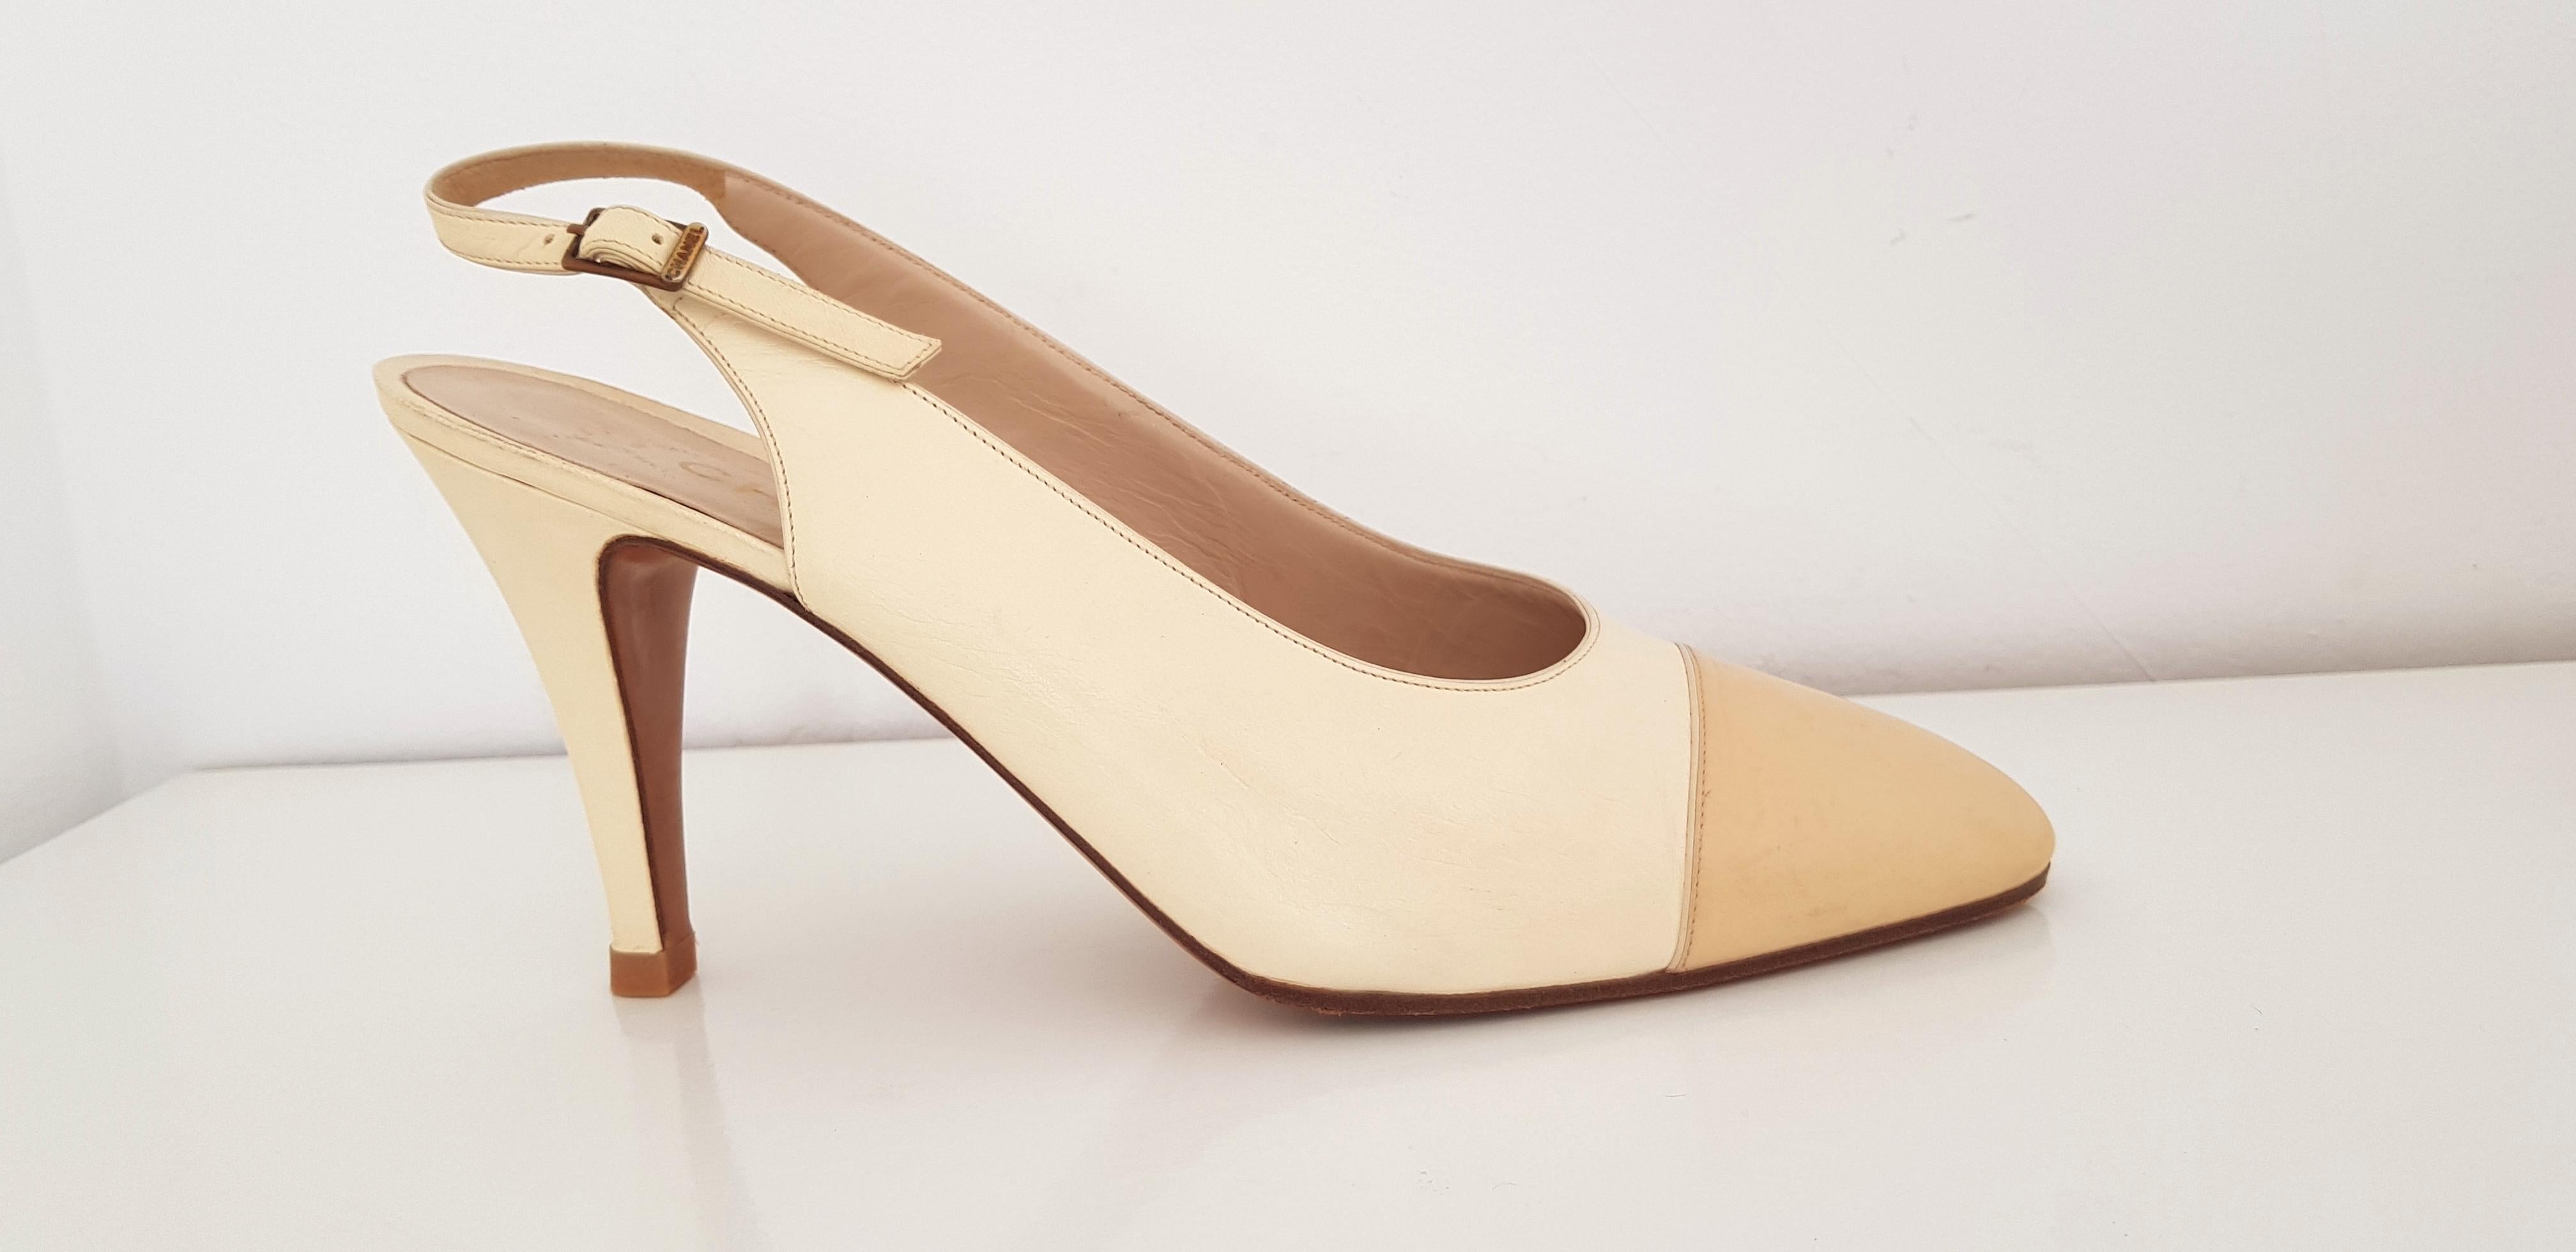 Chanel Leather Slingback Heels.
Colors: Light beige and light caramel.
Conditions: Excellent
Heel height: 8 cm
Size 40
Made in Italy